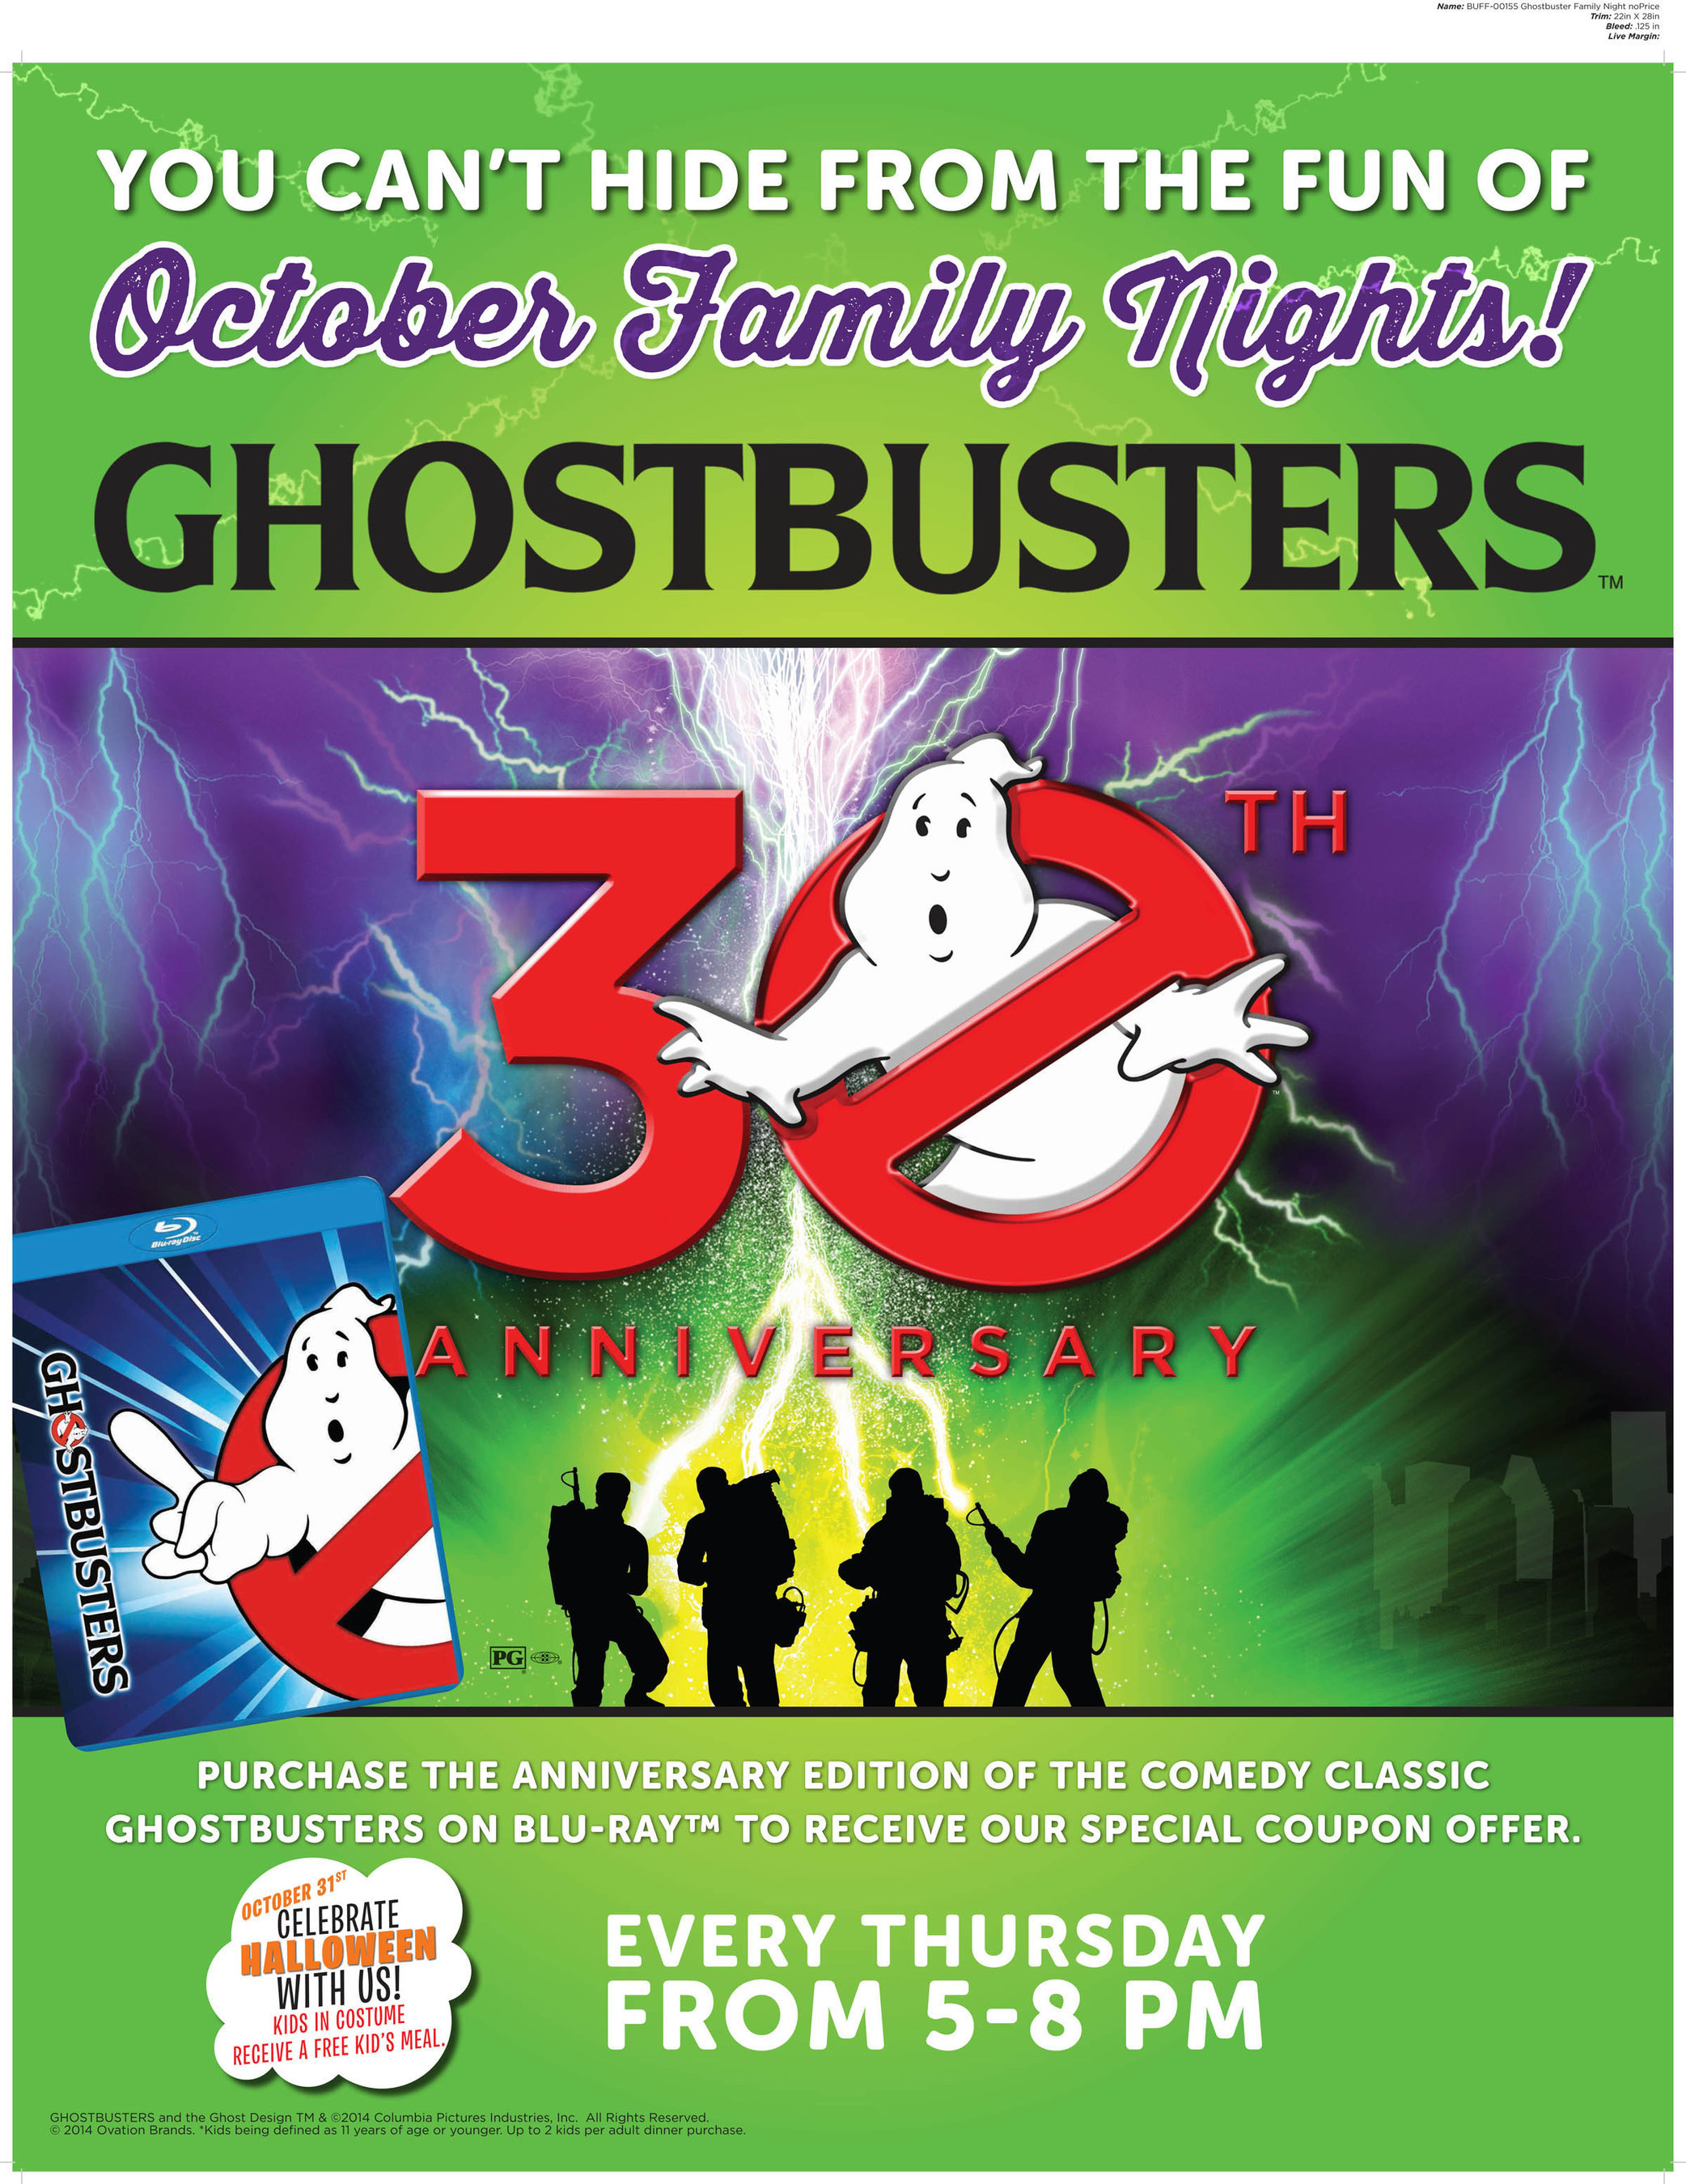 Ryan's, HomeTown Buffet, and Old Country Buffet are adding some spooky fun to Family Night by partnering with Ghostbusters. All 324 restaurants will feature Ghostbusters-themed activities every Thursday night in October.  The restaurants are also celebrating the 30th anniversary of the cult film classics, Ghostbusters I and II, which were released on Blu-ray as special anniversary editions and feature a $3-off dinner coupon good at any of the family-style restaurants. (PRNewsFoto/Ovation Brands)